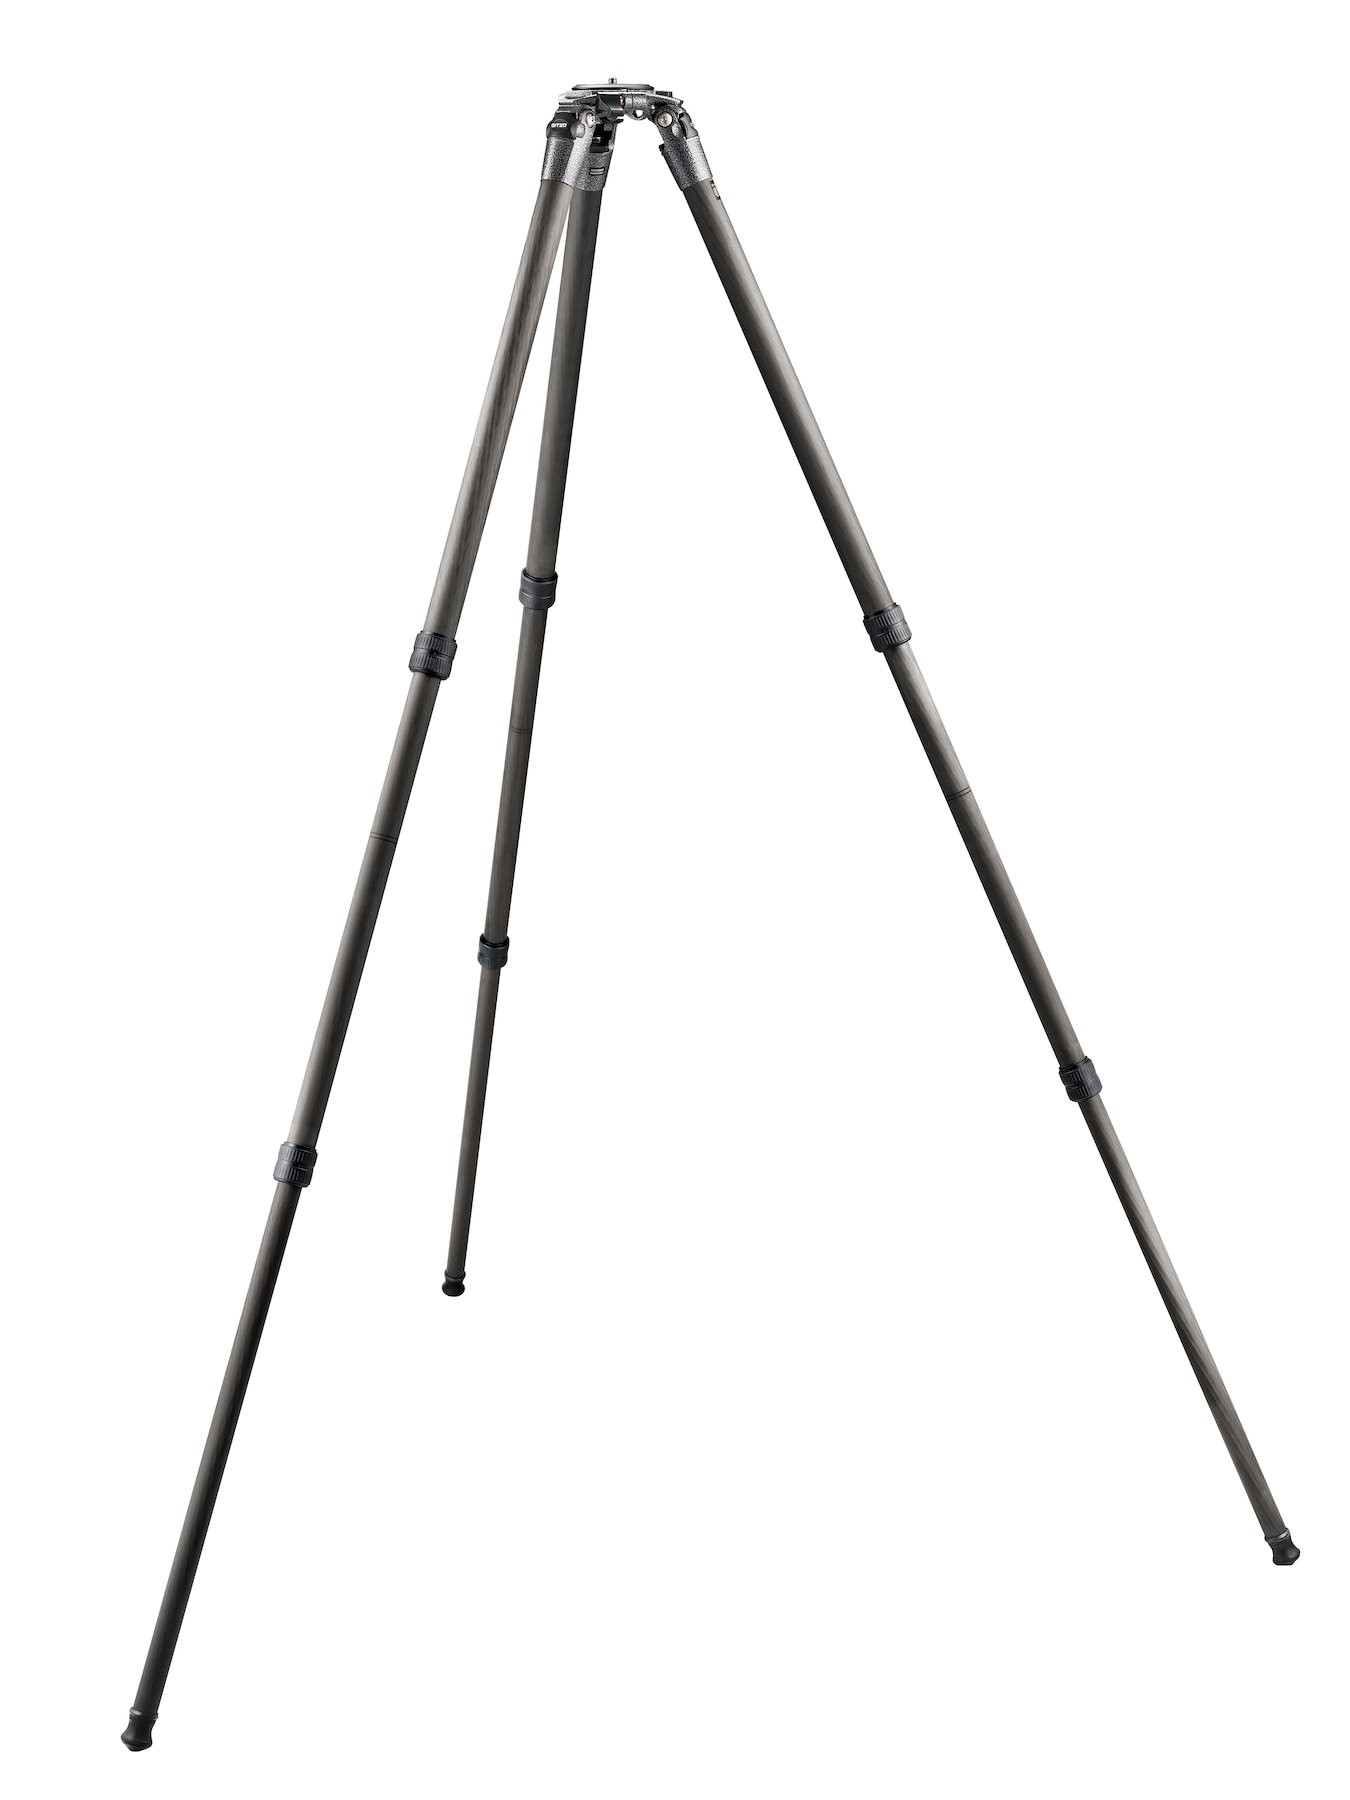 SYSTEMATIC Series 3 carbon tripod, long 3-section eye level